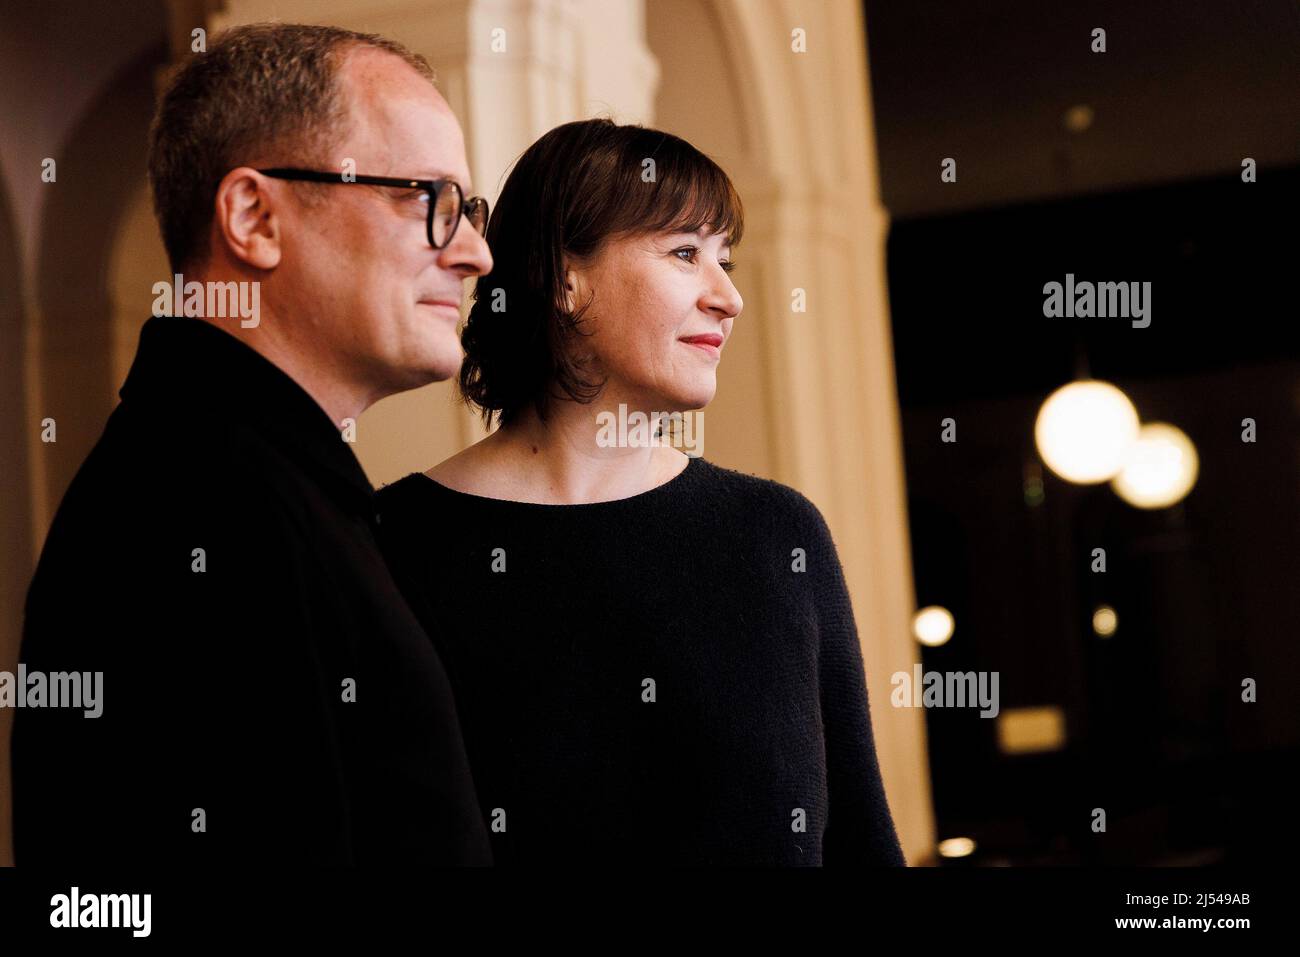 Berlin, Germany. 20th Apr, 2022. Philip Bröking and Susanne Moser, designated artistic director duo of the Komische Oper Berlin, photographed on the sidelines of a press conference of the Komische Oper Berlin for the 2022/23 season. Credit: Carsten Koall/dpa/Alamy Live News Stock Photo